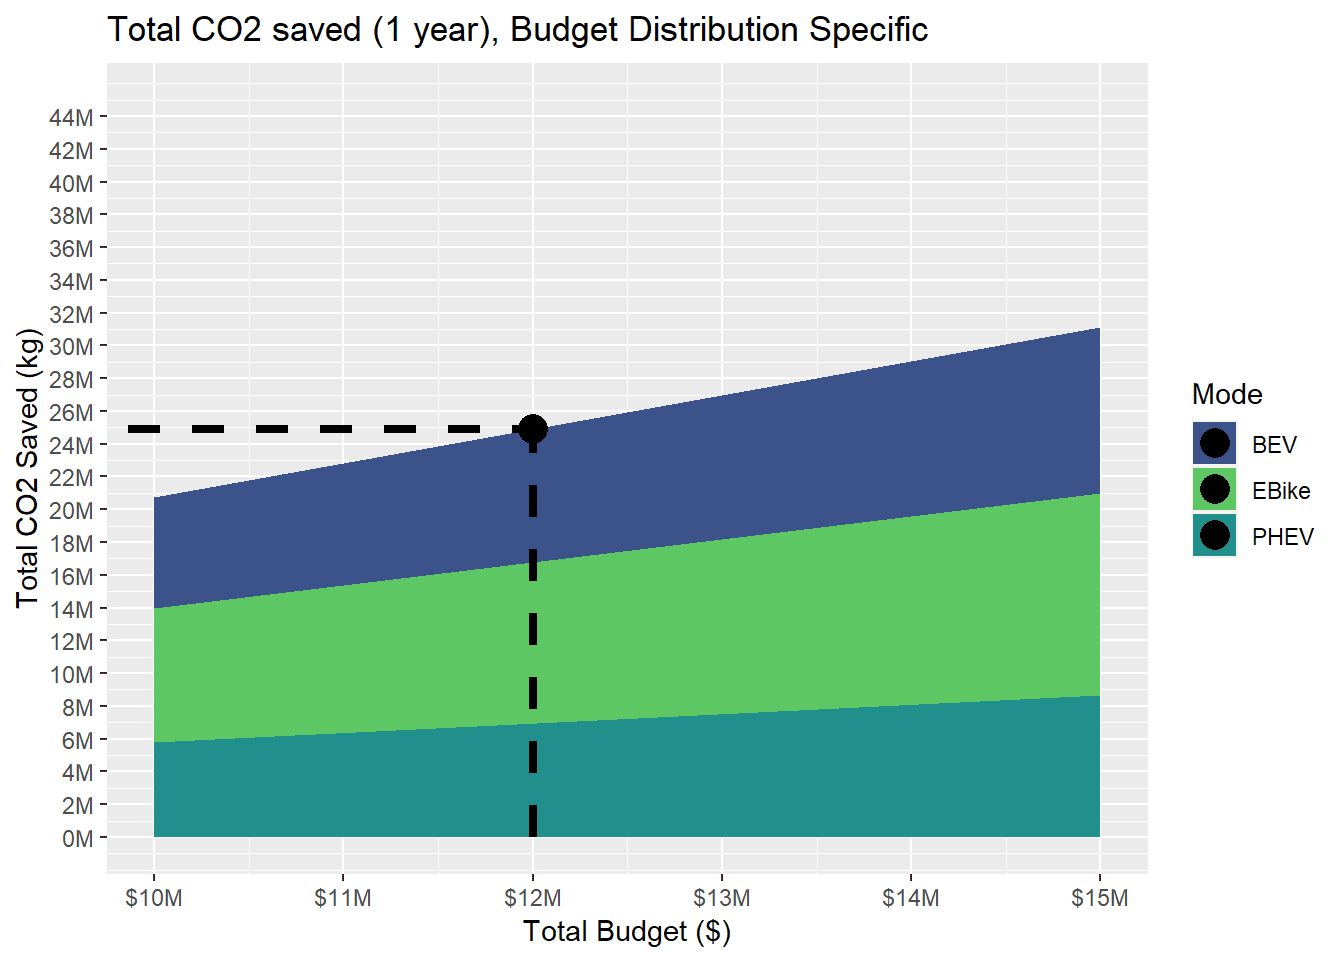 This plot displays the total amount of CO2 saved, in kg, thanks to the incentive program designed by the user. In this case, e-bikes save 10.2 million kg, battery electric vehicles save 8.5 million kg, and plug-in hybrid electric vehicles saved 6.8 millio